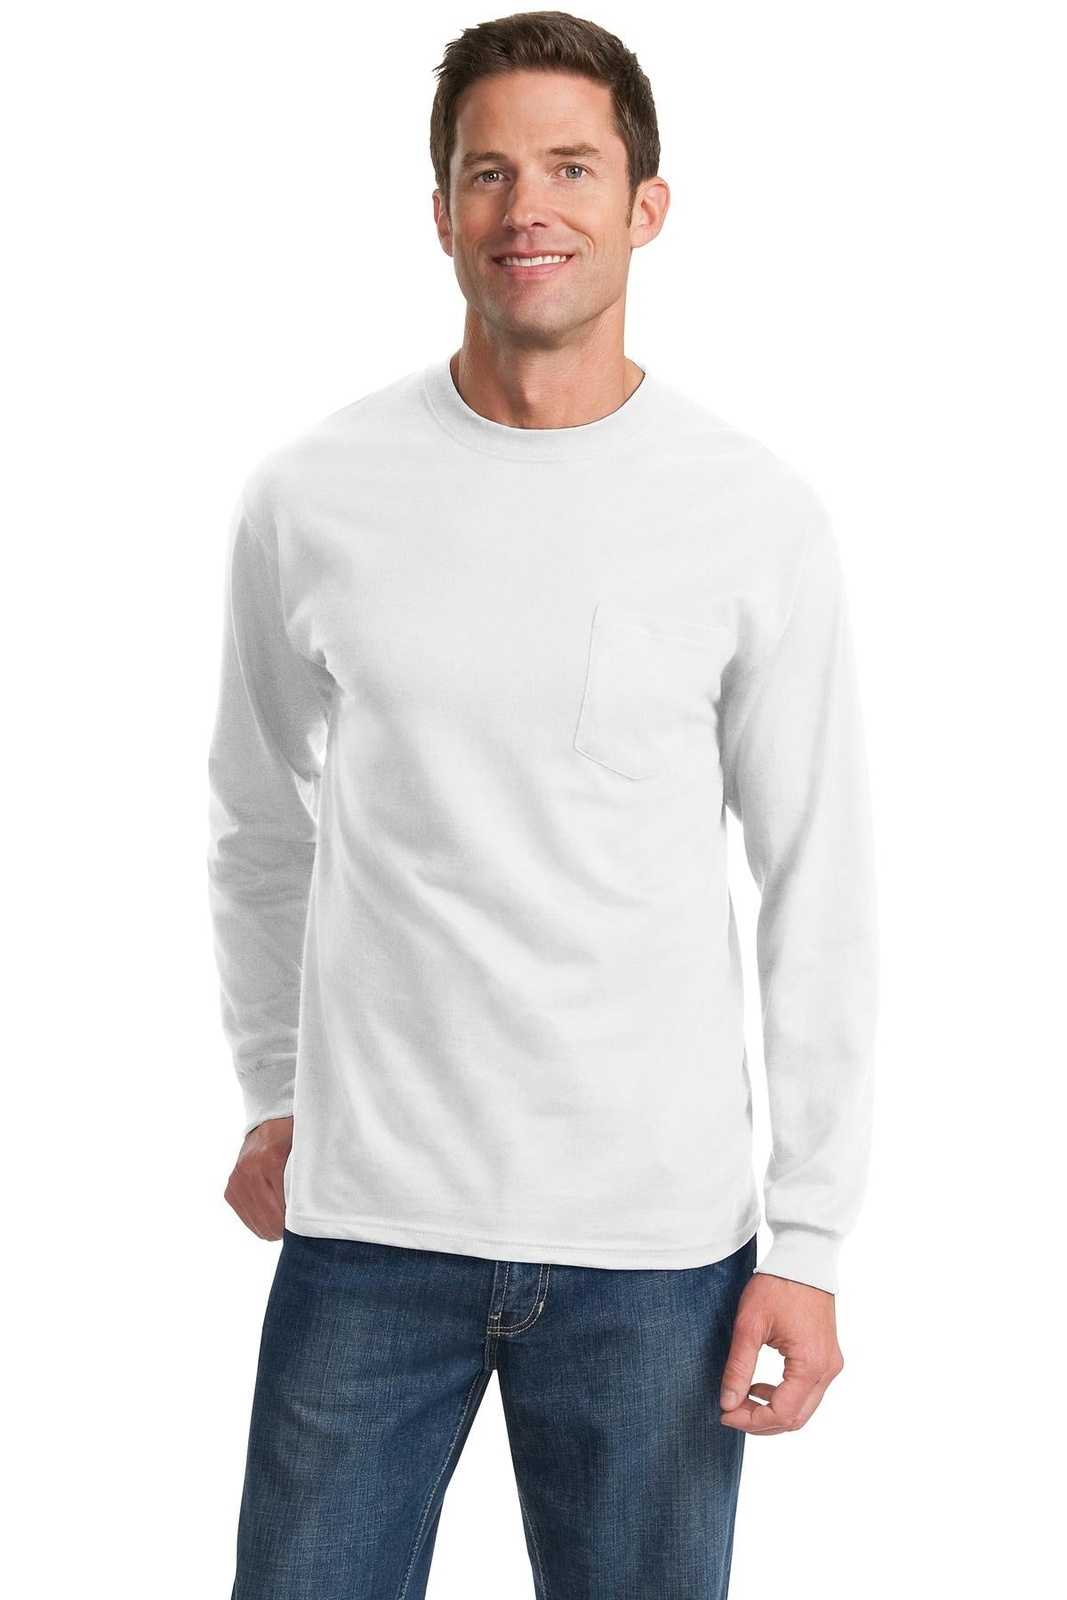 Port & Company PC61LSP Long Sleeve Essential Pocket Tee - White - HIT a Double - 1